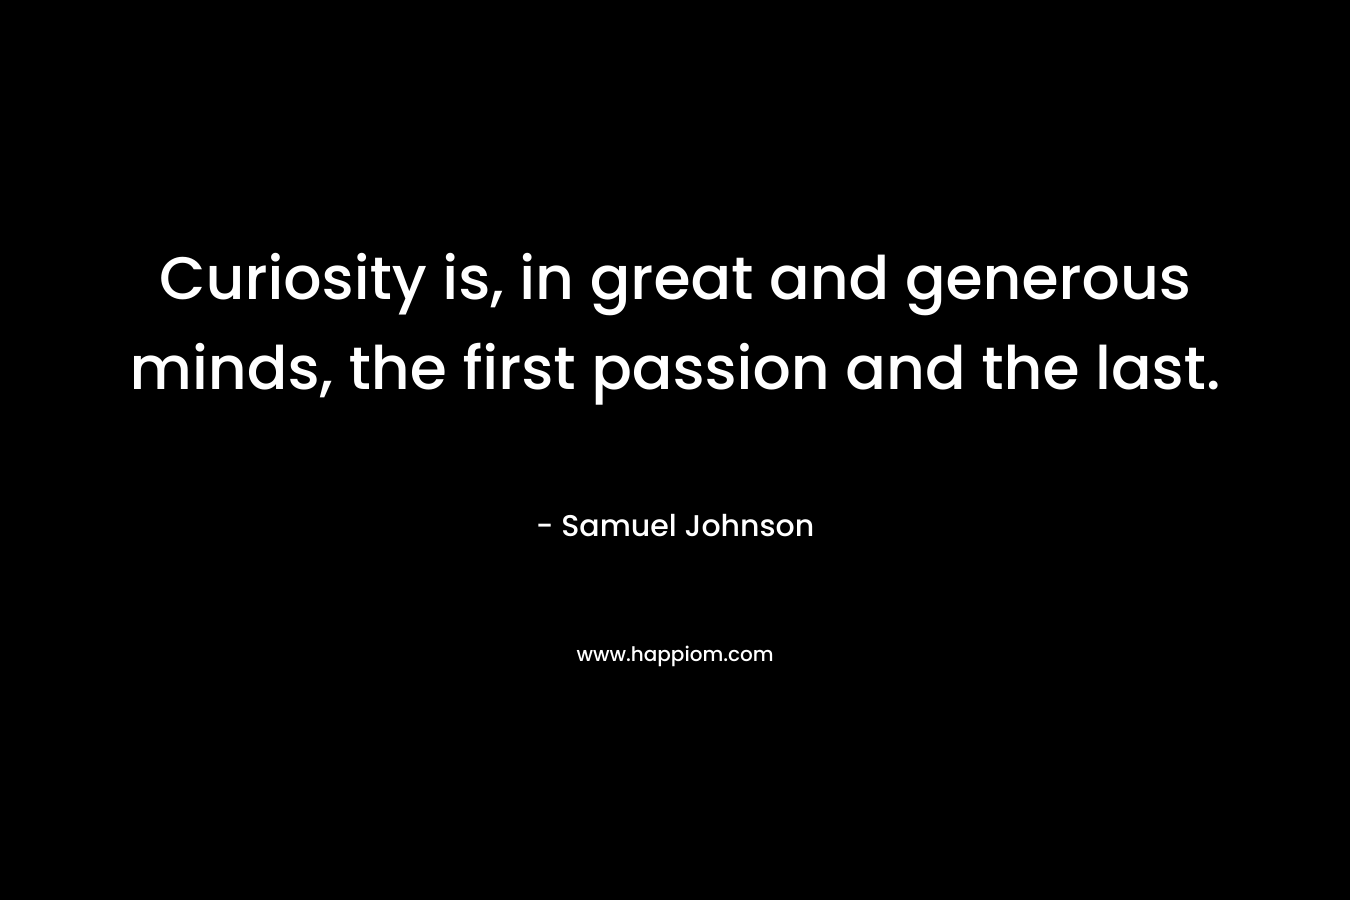 Curiosity is, in great and generous minds, the first passion and the last. – Samuel Johnson